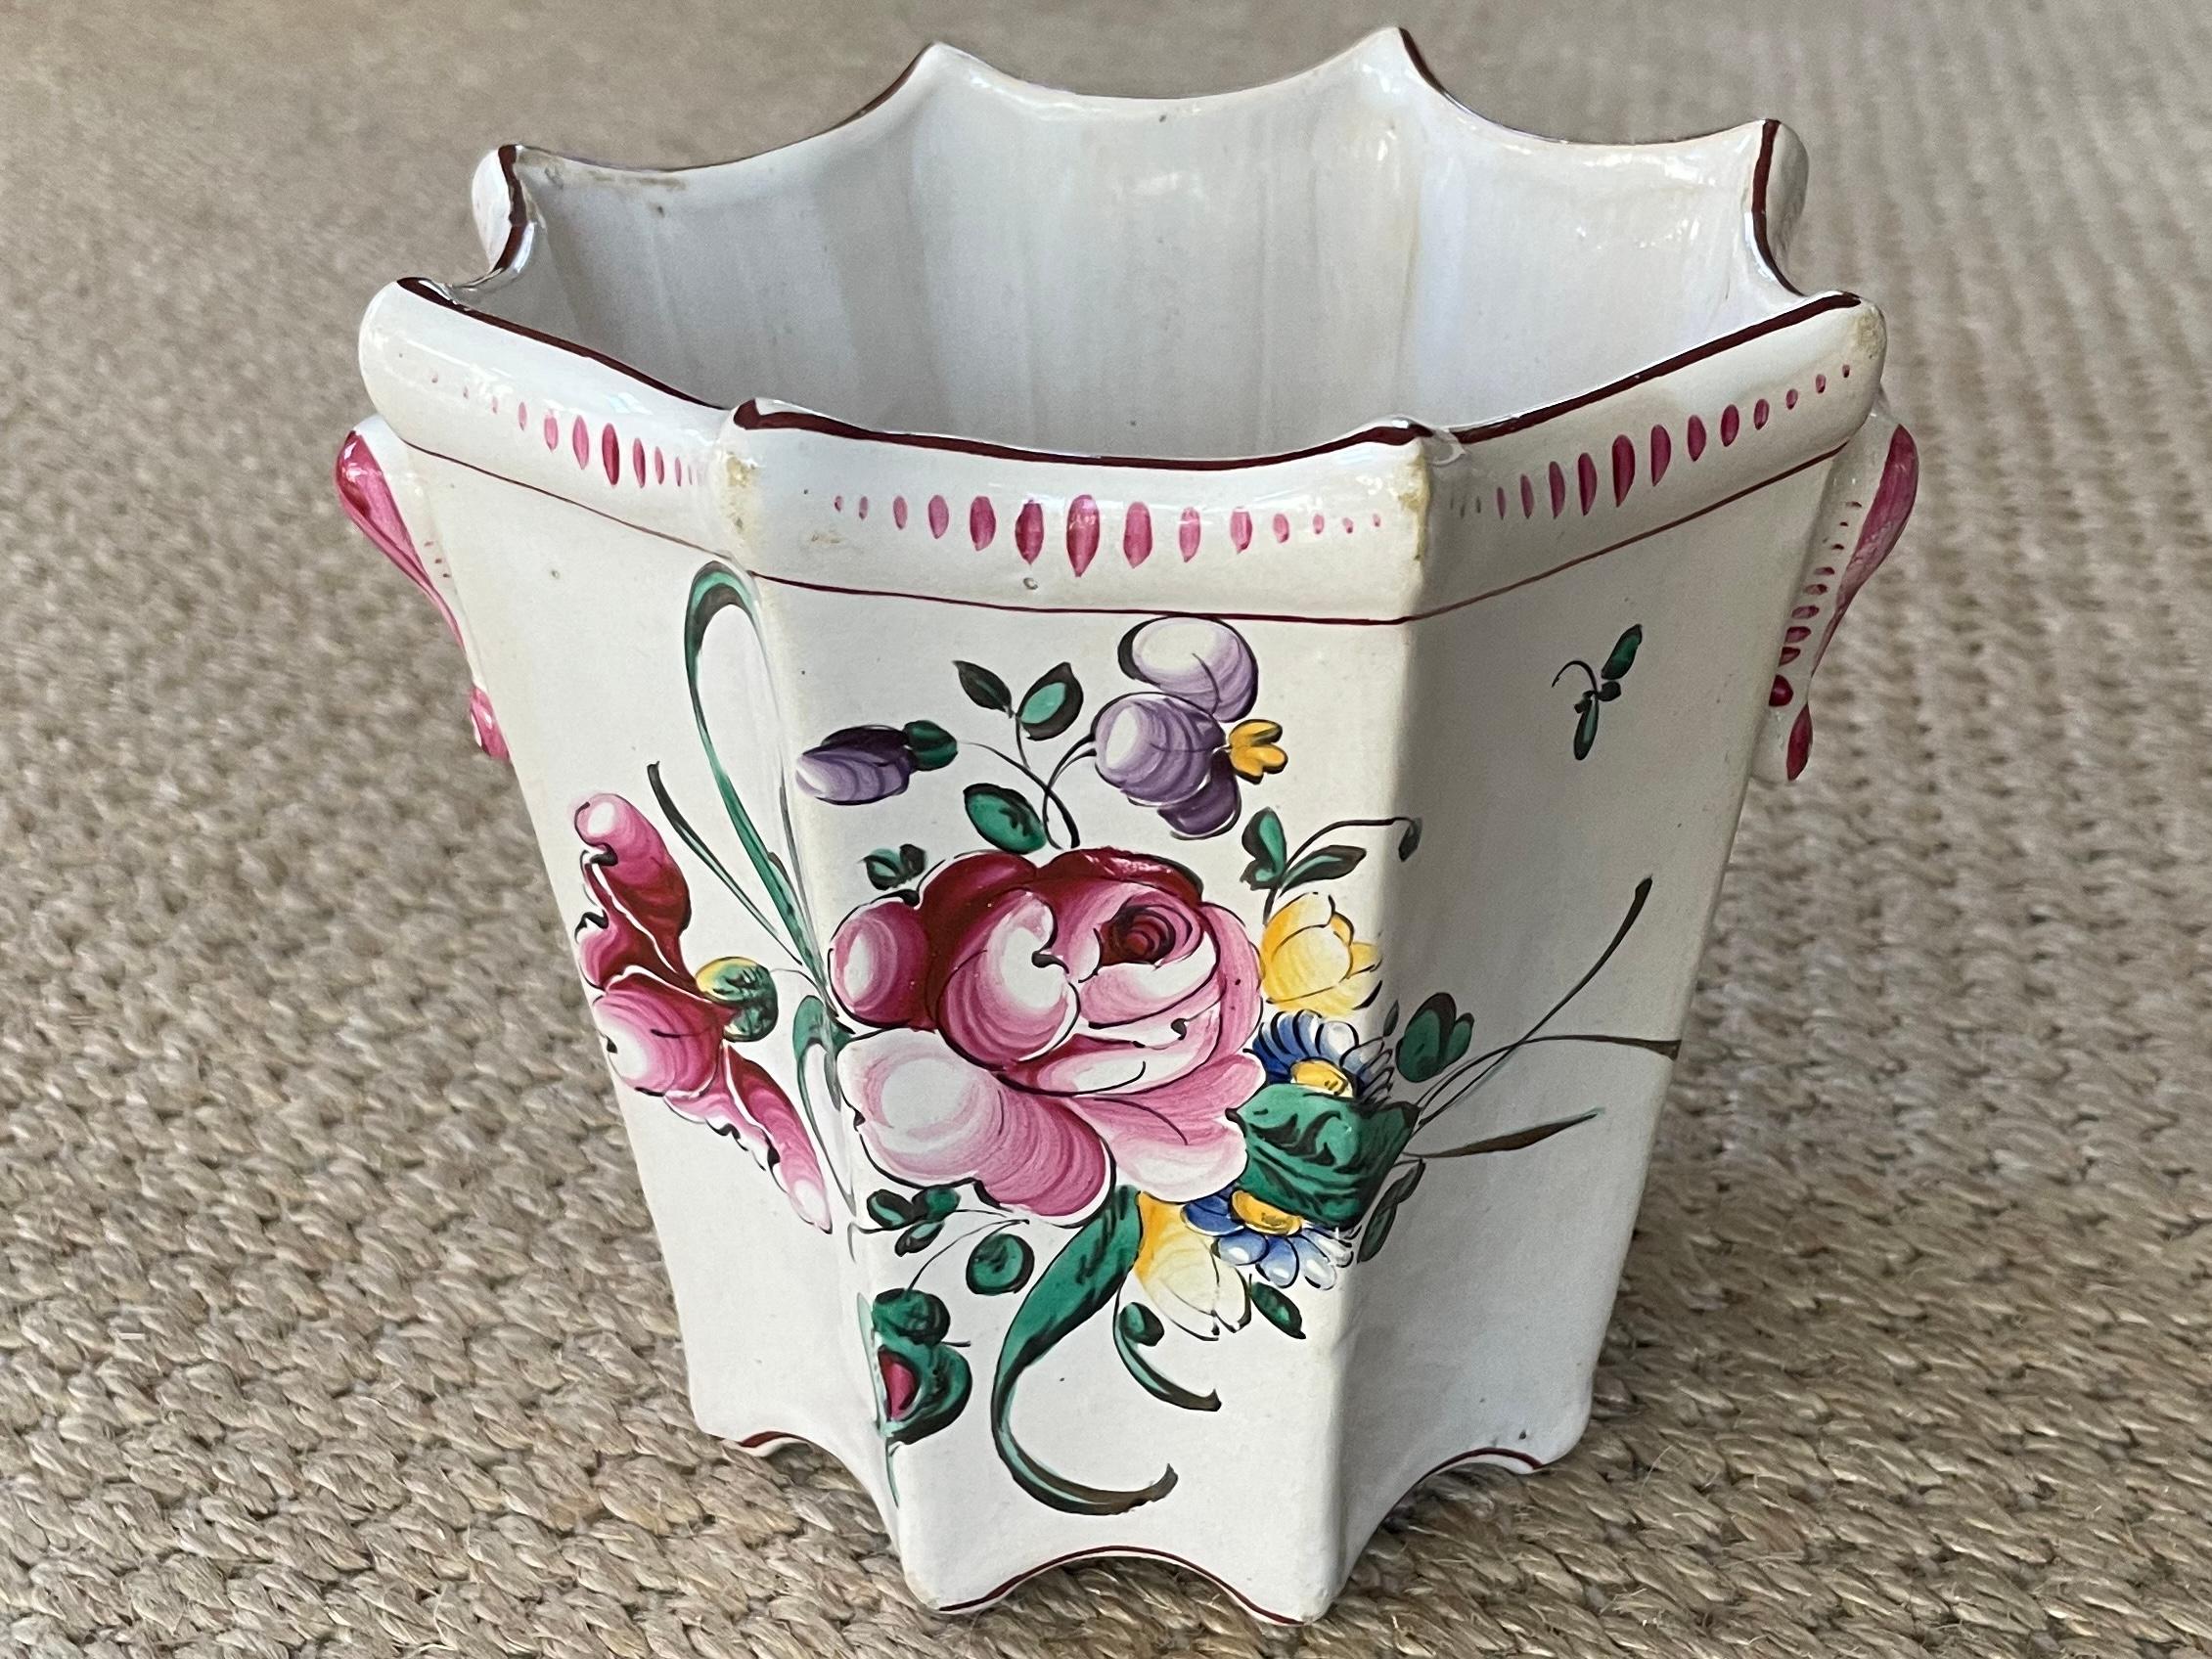 Strasbourg floral cachepot. Flared octagonal cream faience pot with pink, magenta, purple and yellow Strasbourg style floral painted sprays and characteristic decoration with  opposing handles. Vintage faience cachepot flowerpot marked Made in